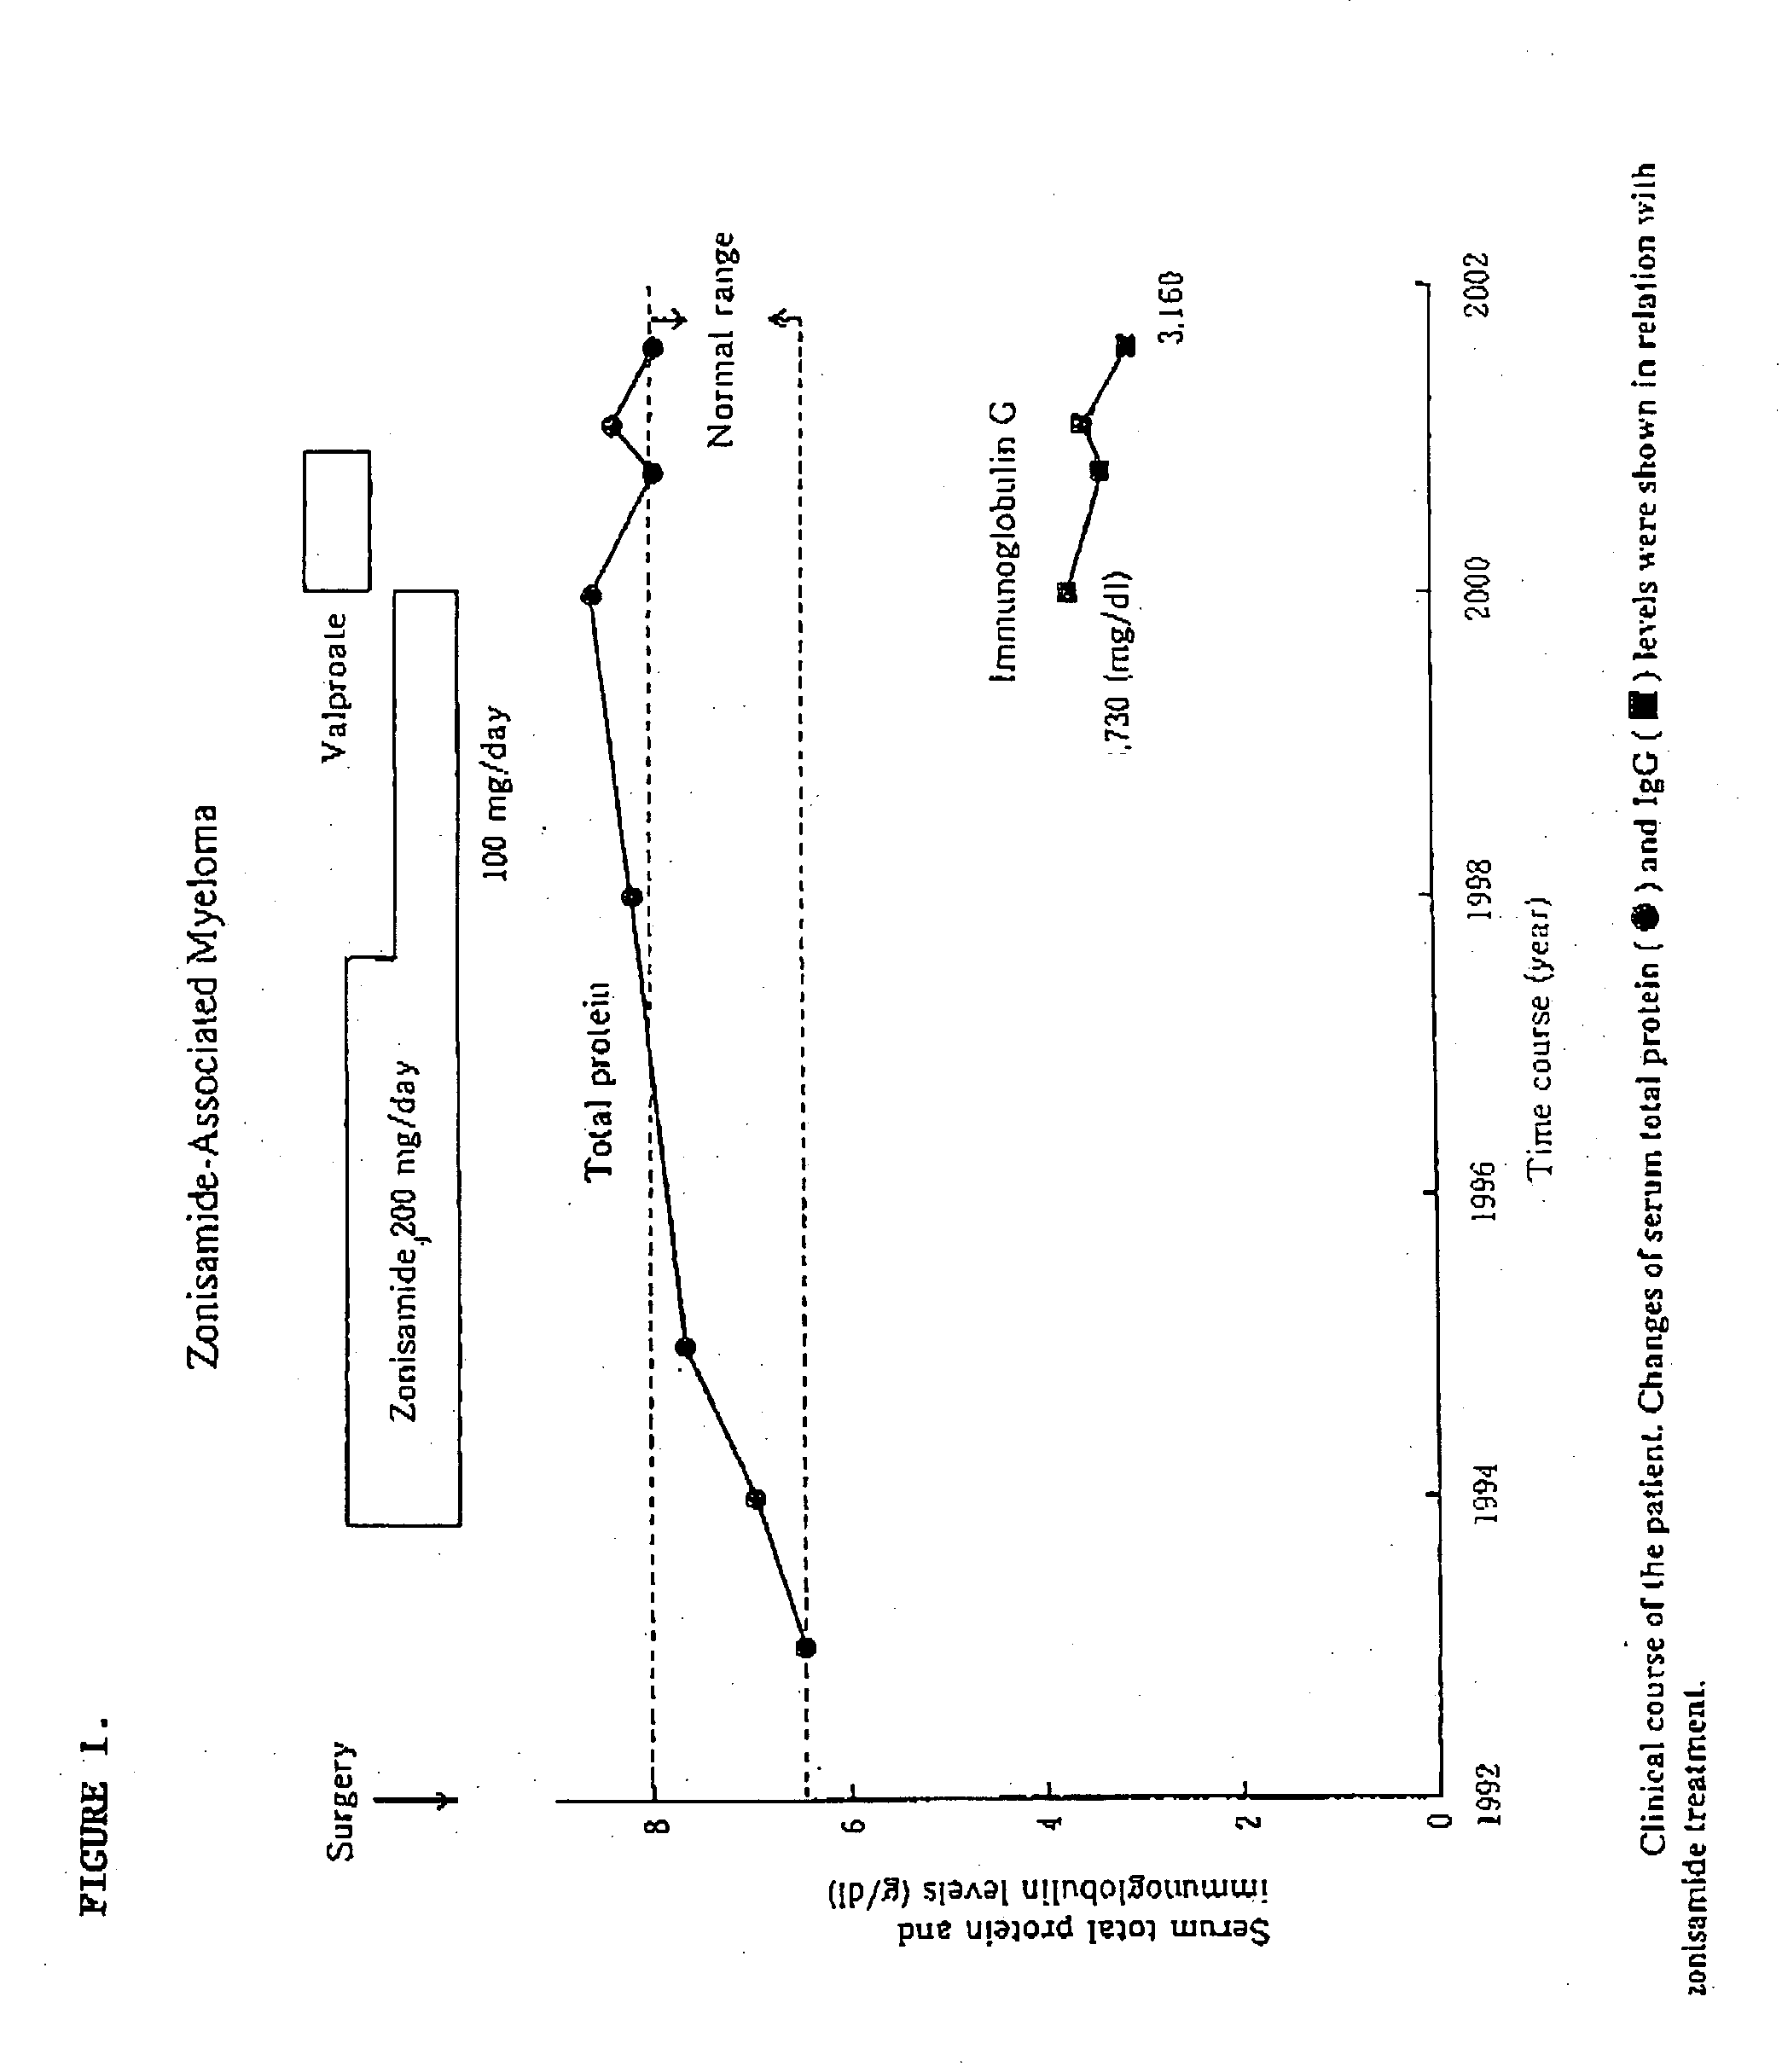 Methods of using zonisamide as an adjunctive therapy for partial seizures